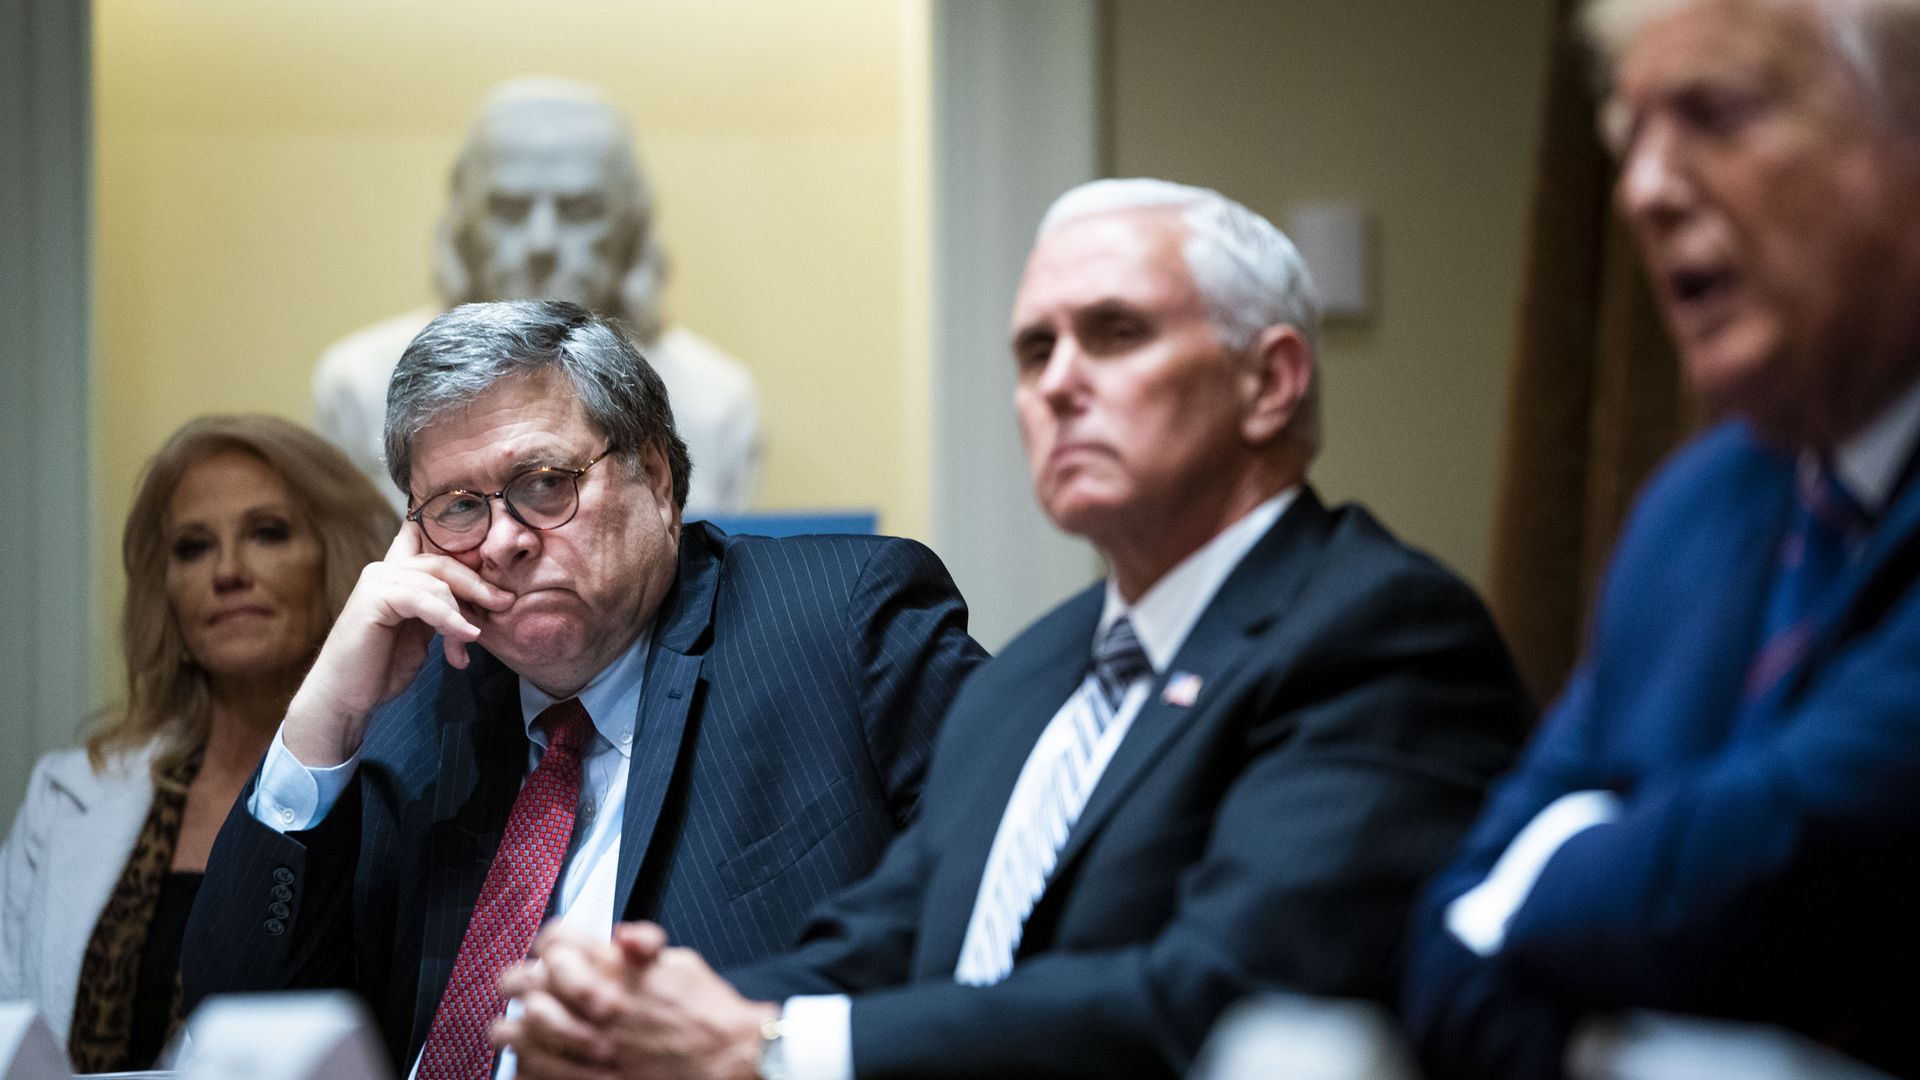 Barr, Pence and Trump